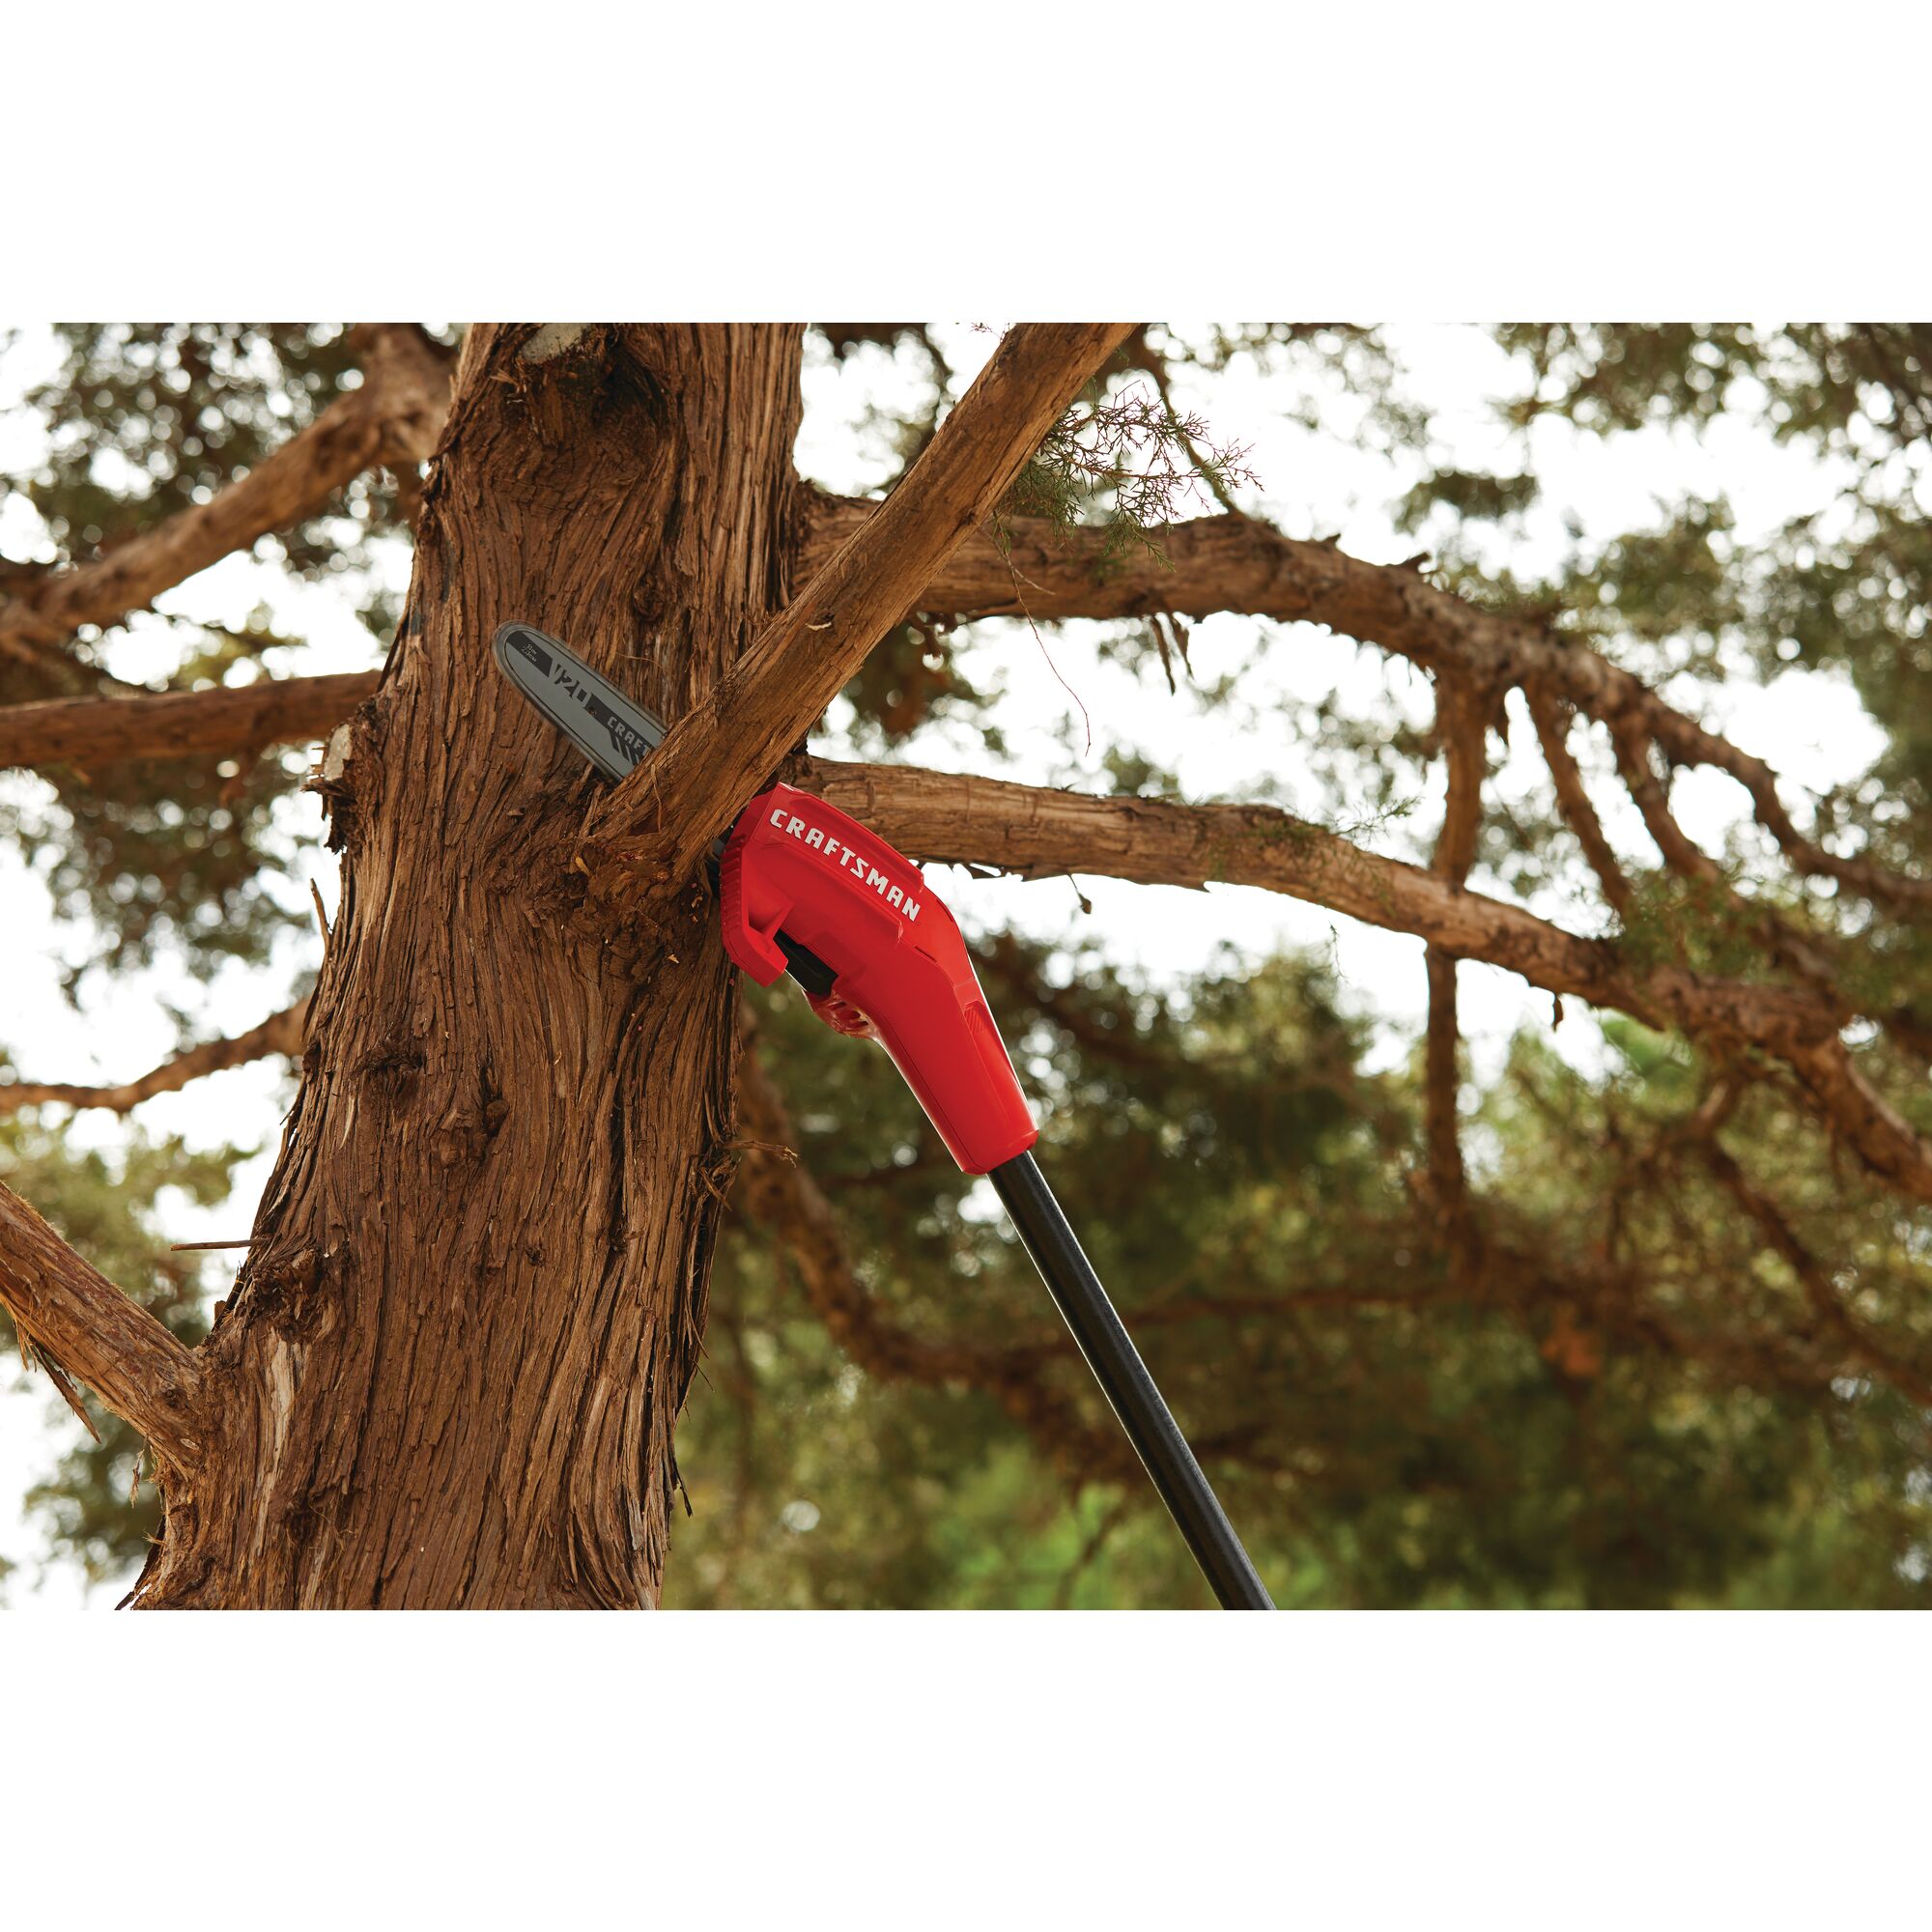 Up to 14 foot reach feature of cordless pole chainsaw kit 4 amp hour.